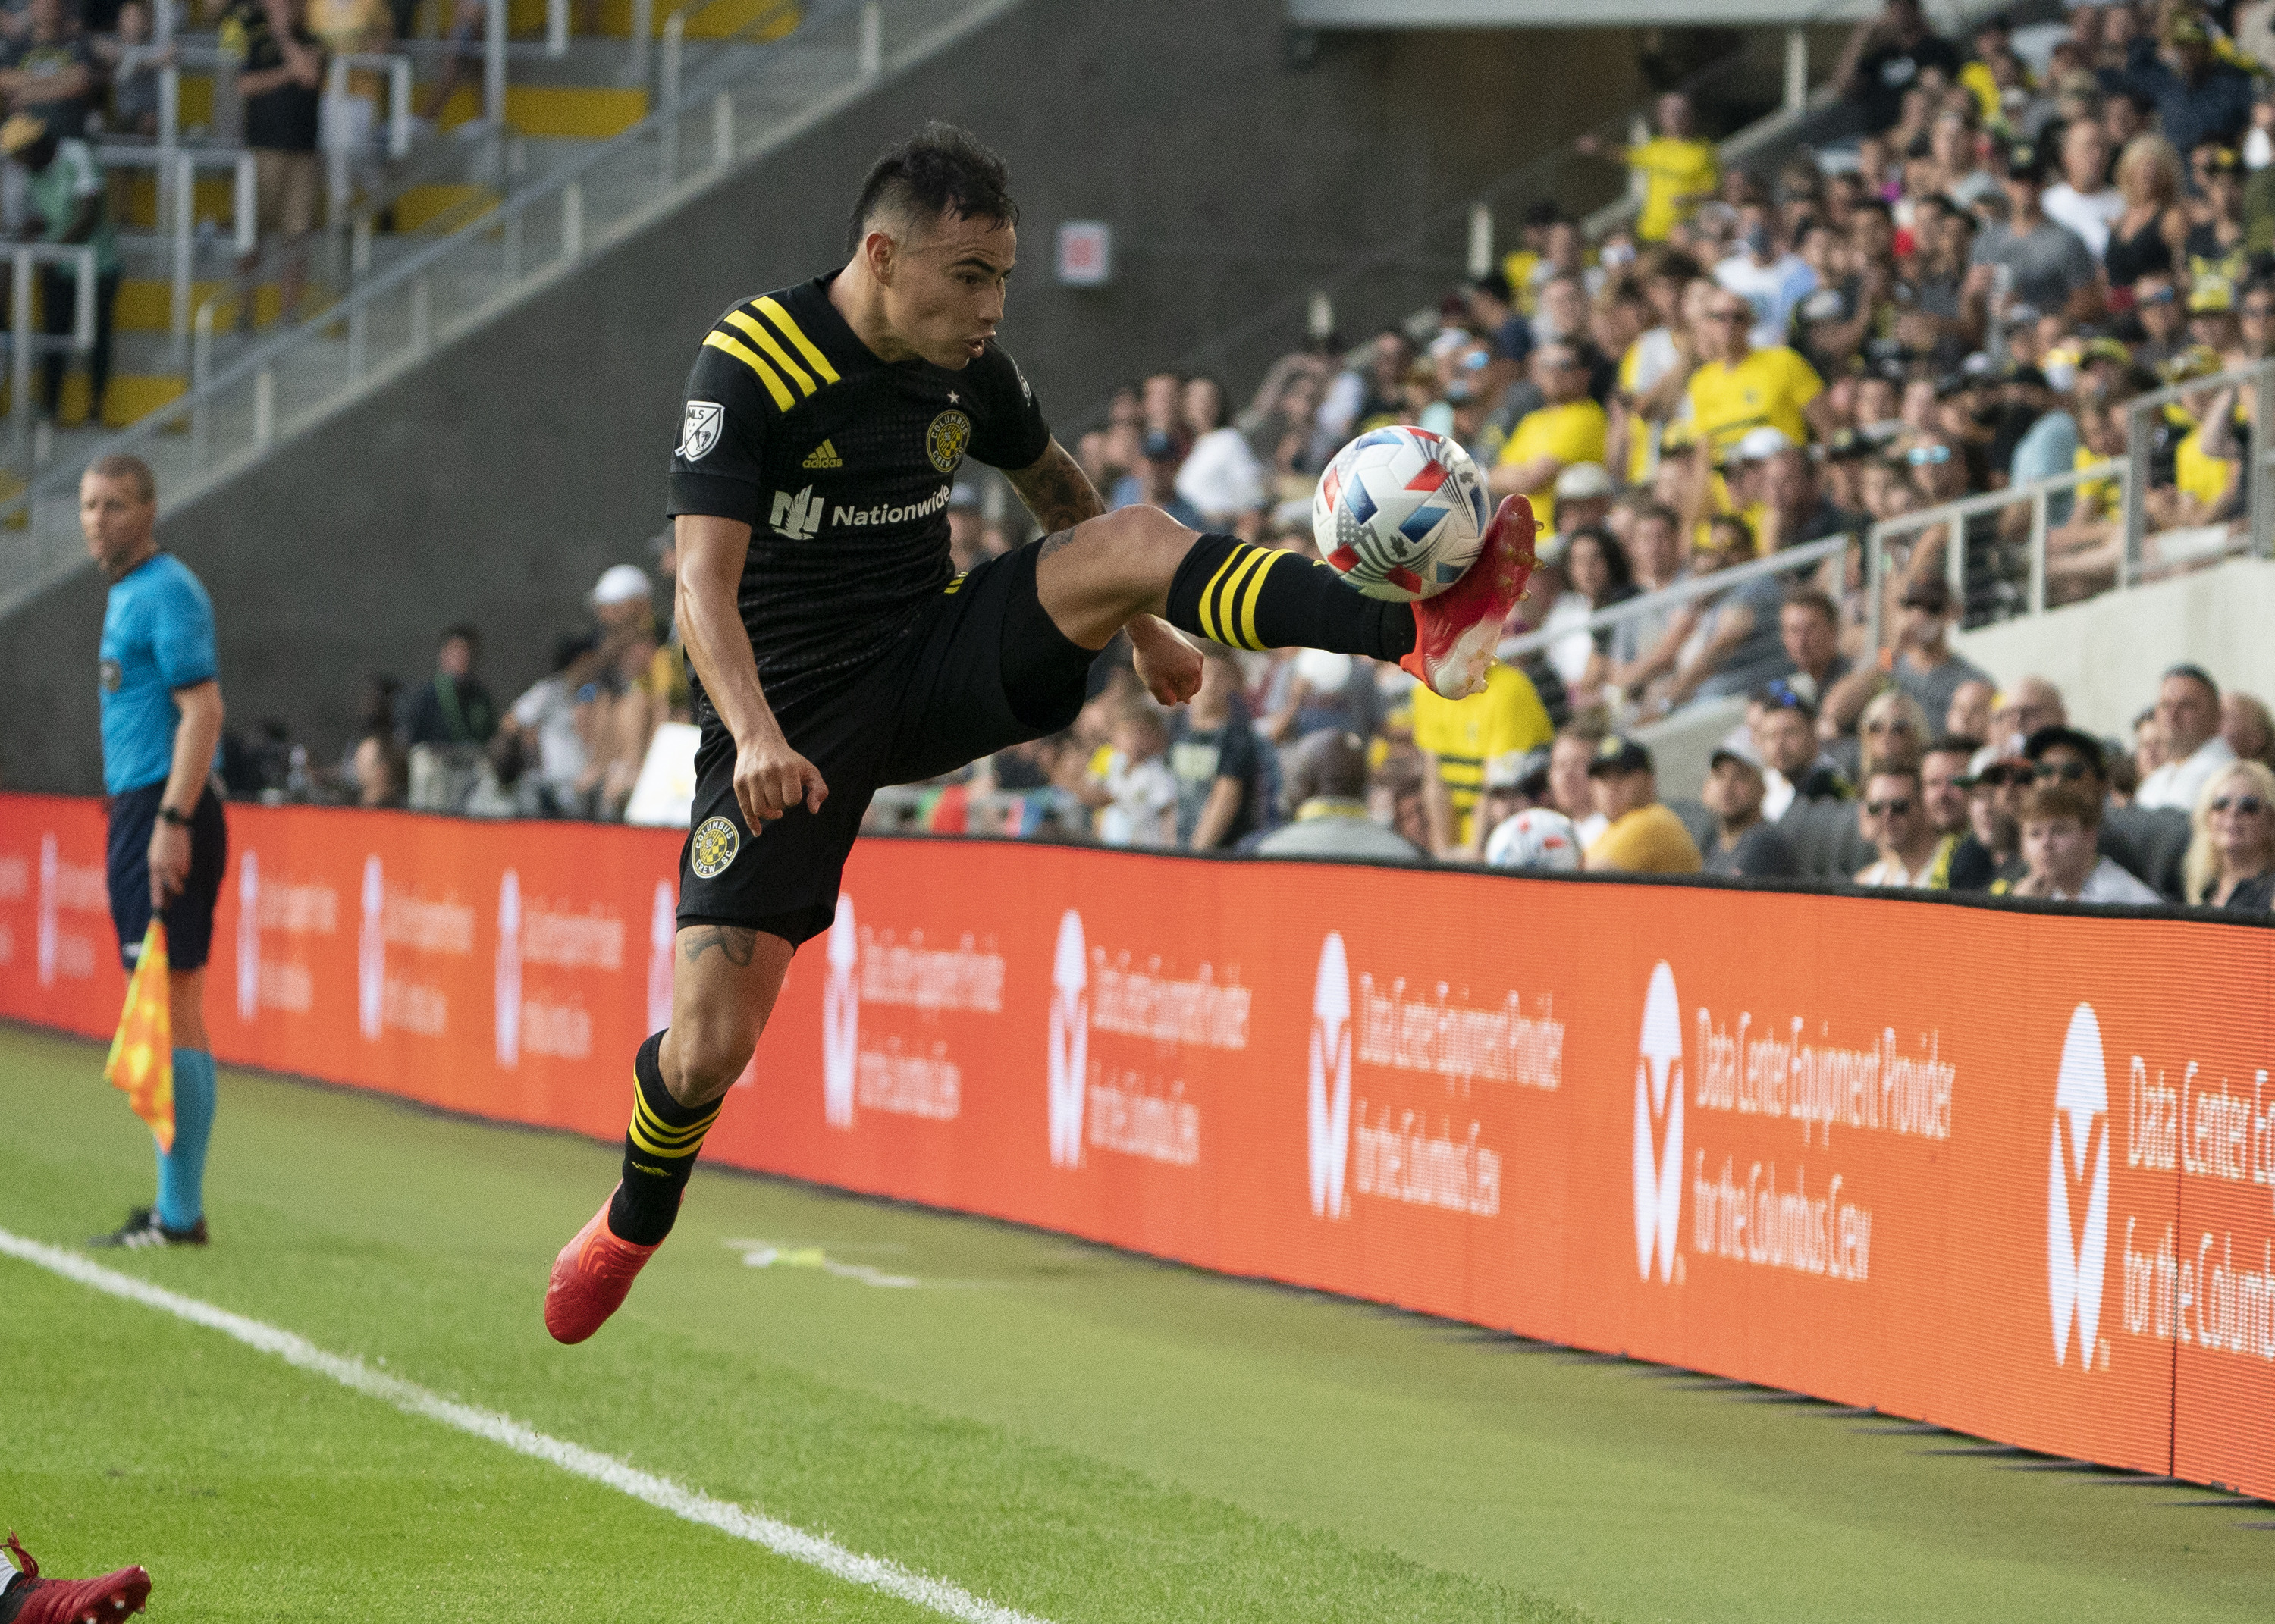 SOCCER: AUG 21 MLS - Seattle Sounders FC at Columbus Crew SC